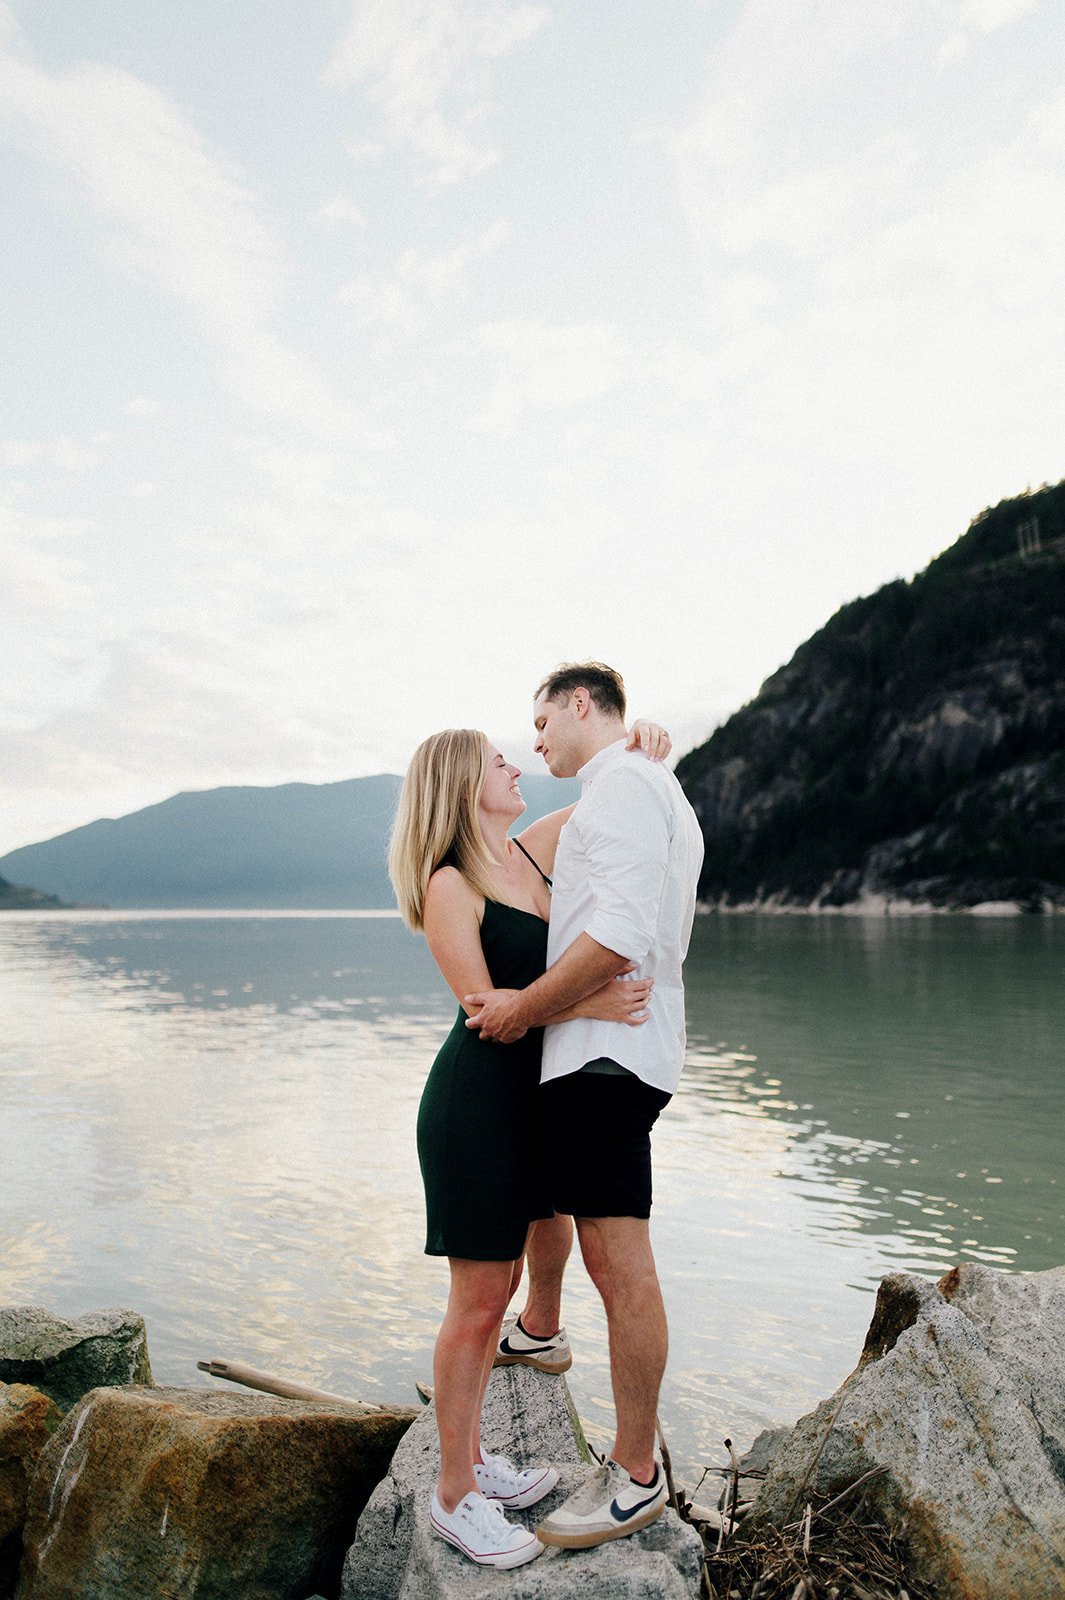 A man and woman embrace in front of a scenic lake as they stand on rocks,surrounded by mountains in Squamish, BC   